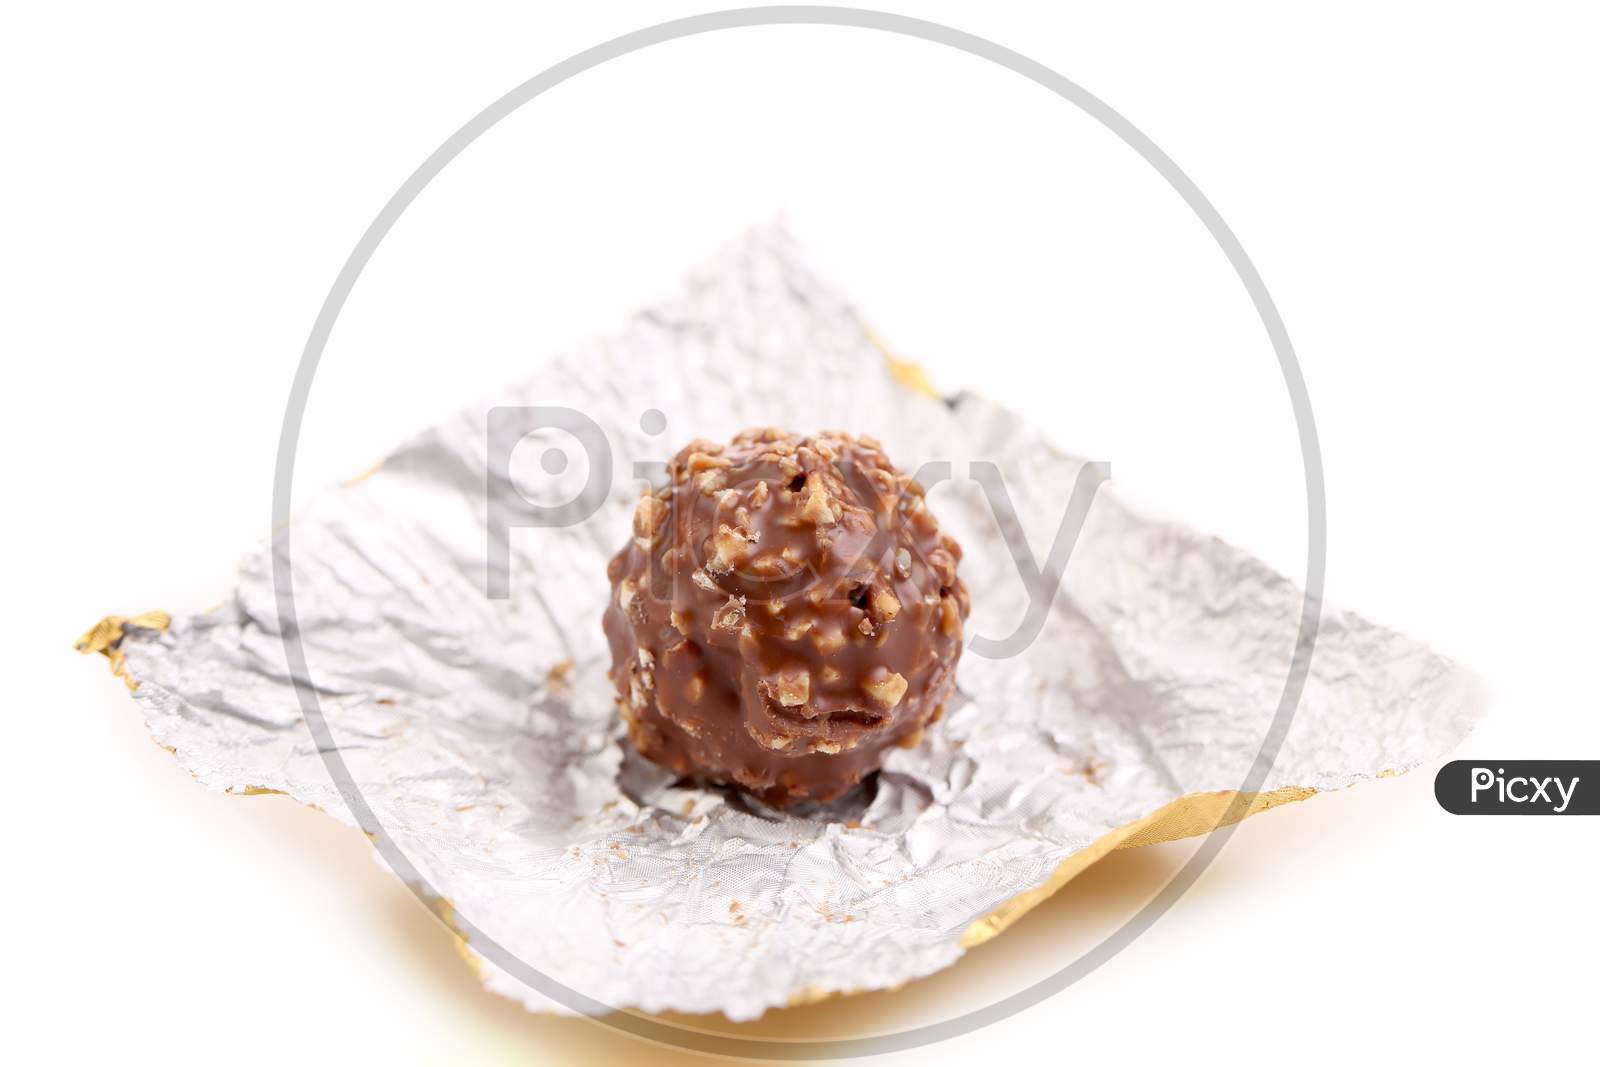 Chocolate On A Foil. Isolated On A White Background.